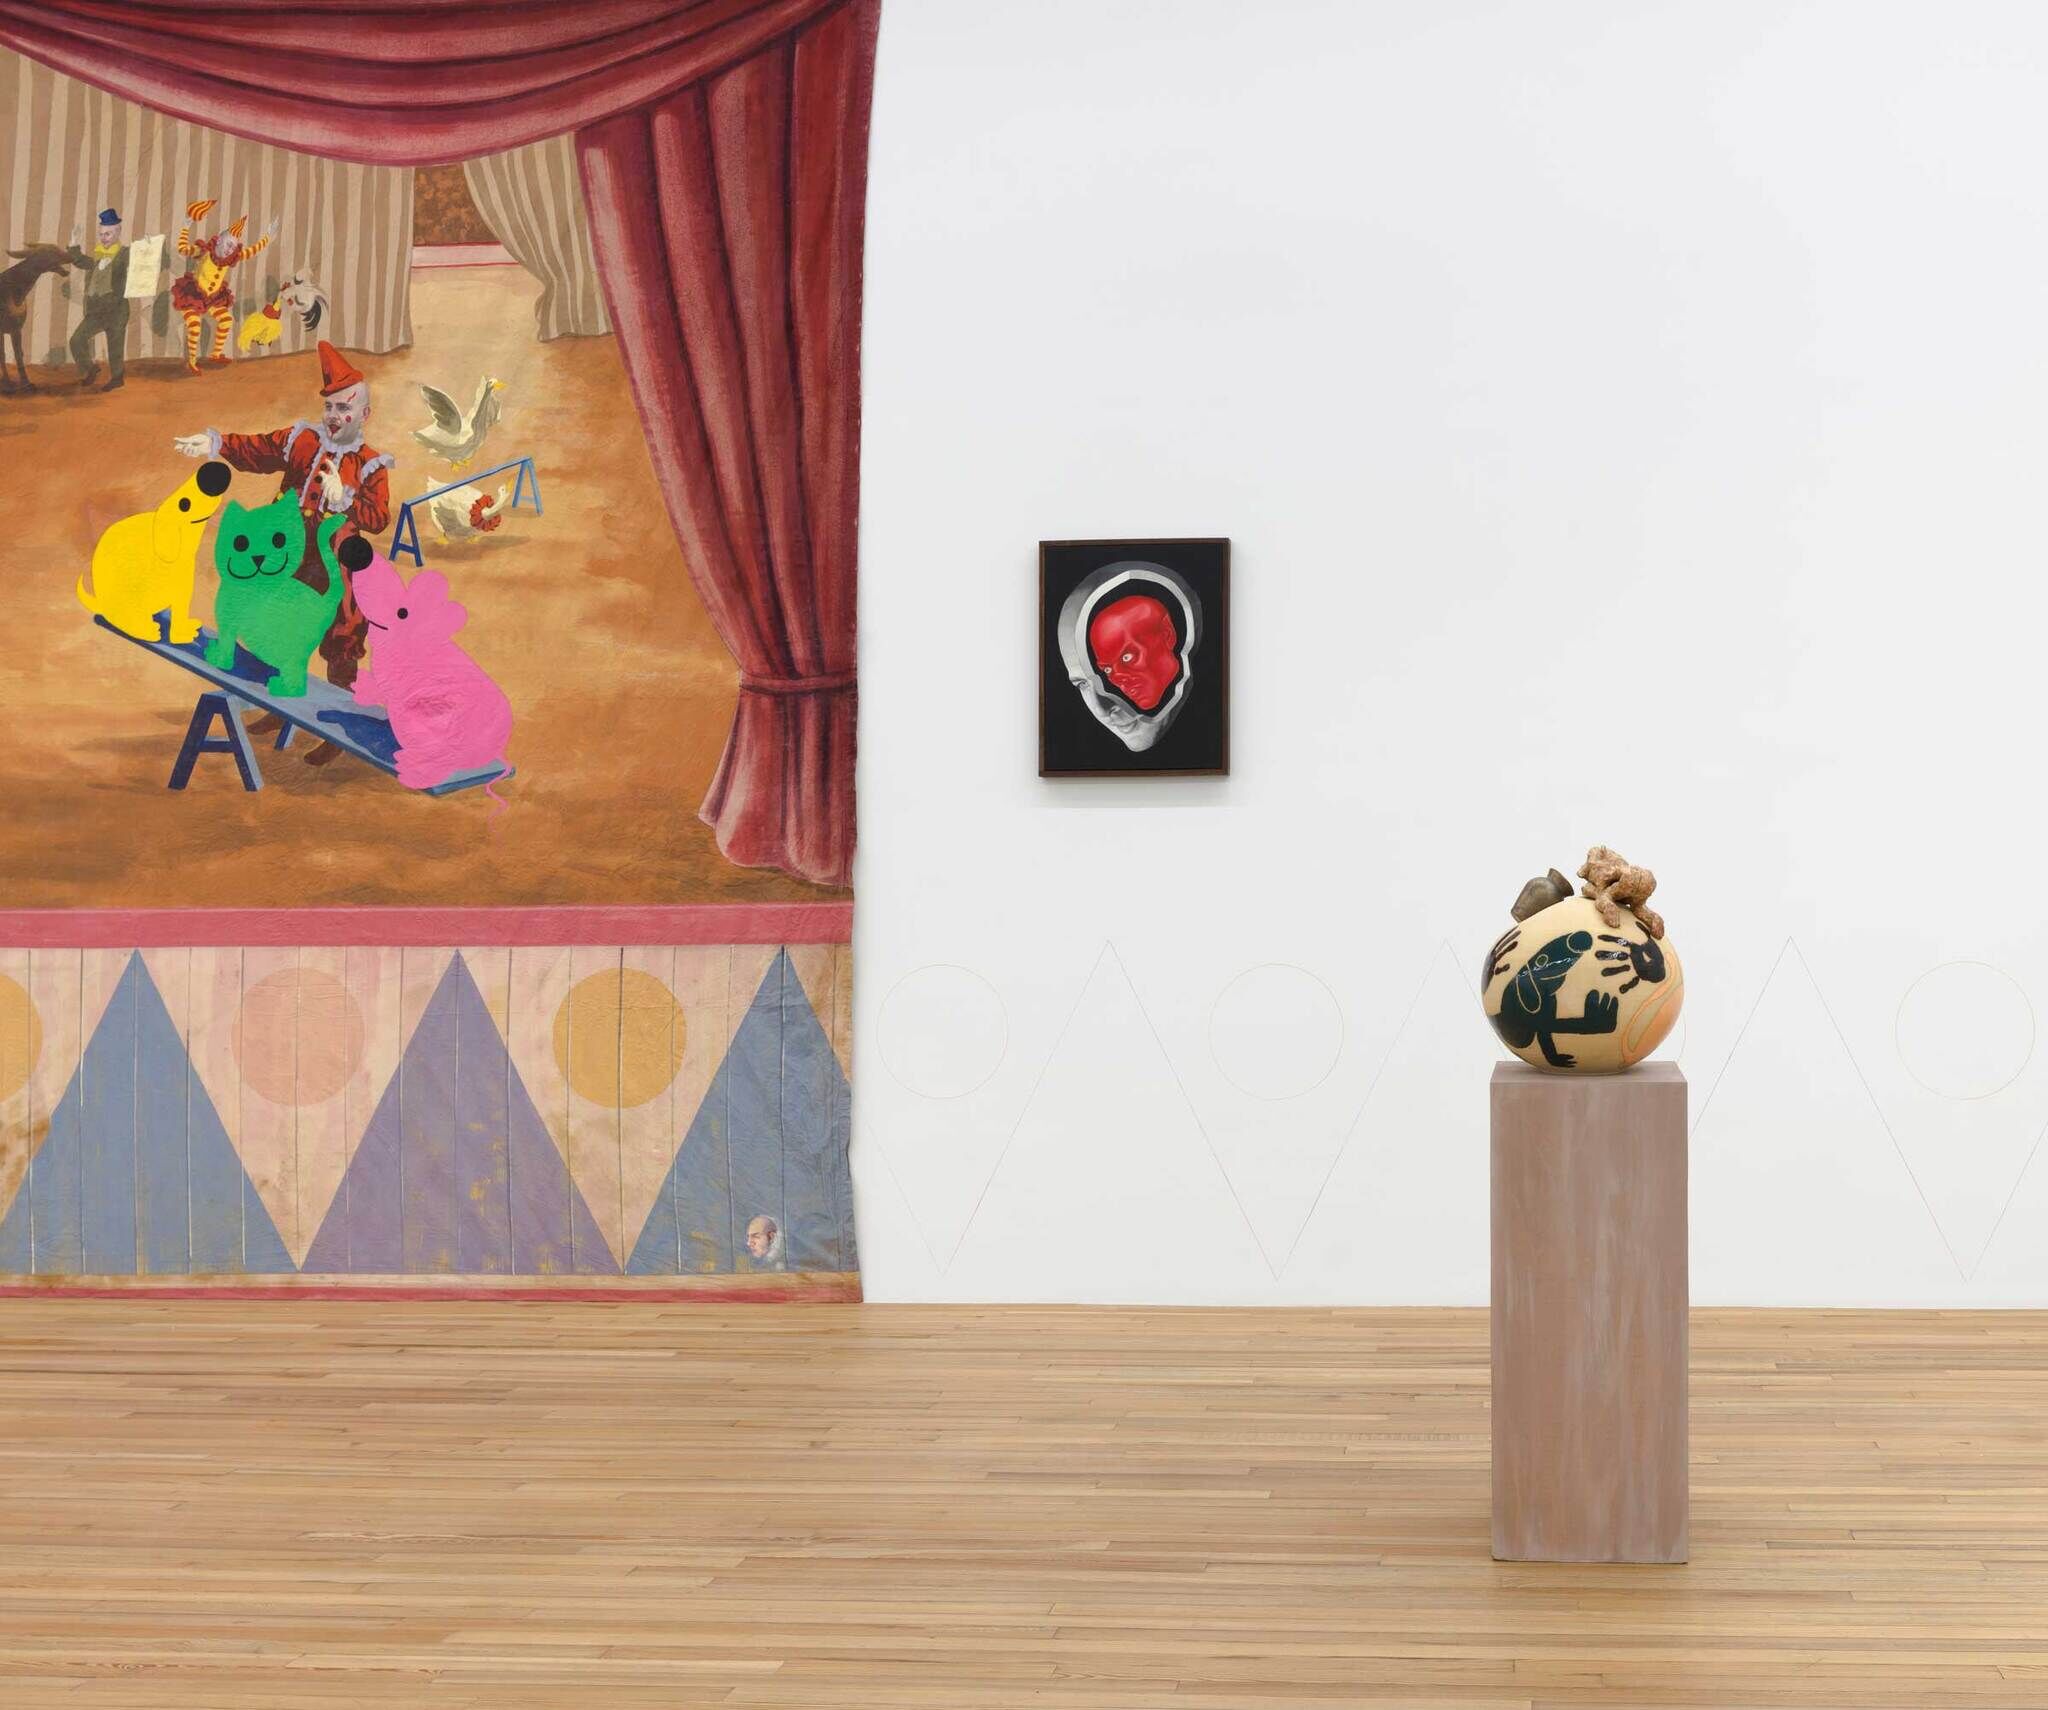 In the background there is a painting of a circus with colorful toy figures next to a smaller painting with a red skull inside of a white skull, and in the foreground there is a circular vase with a black dog.